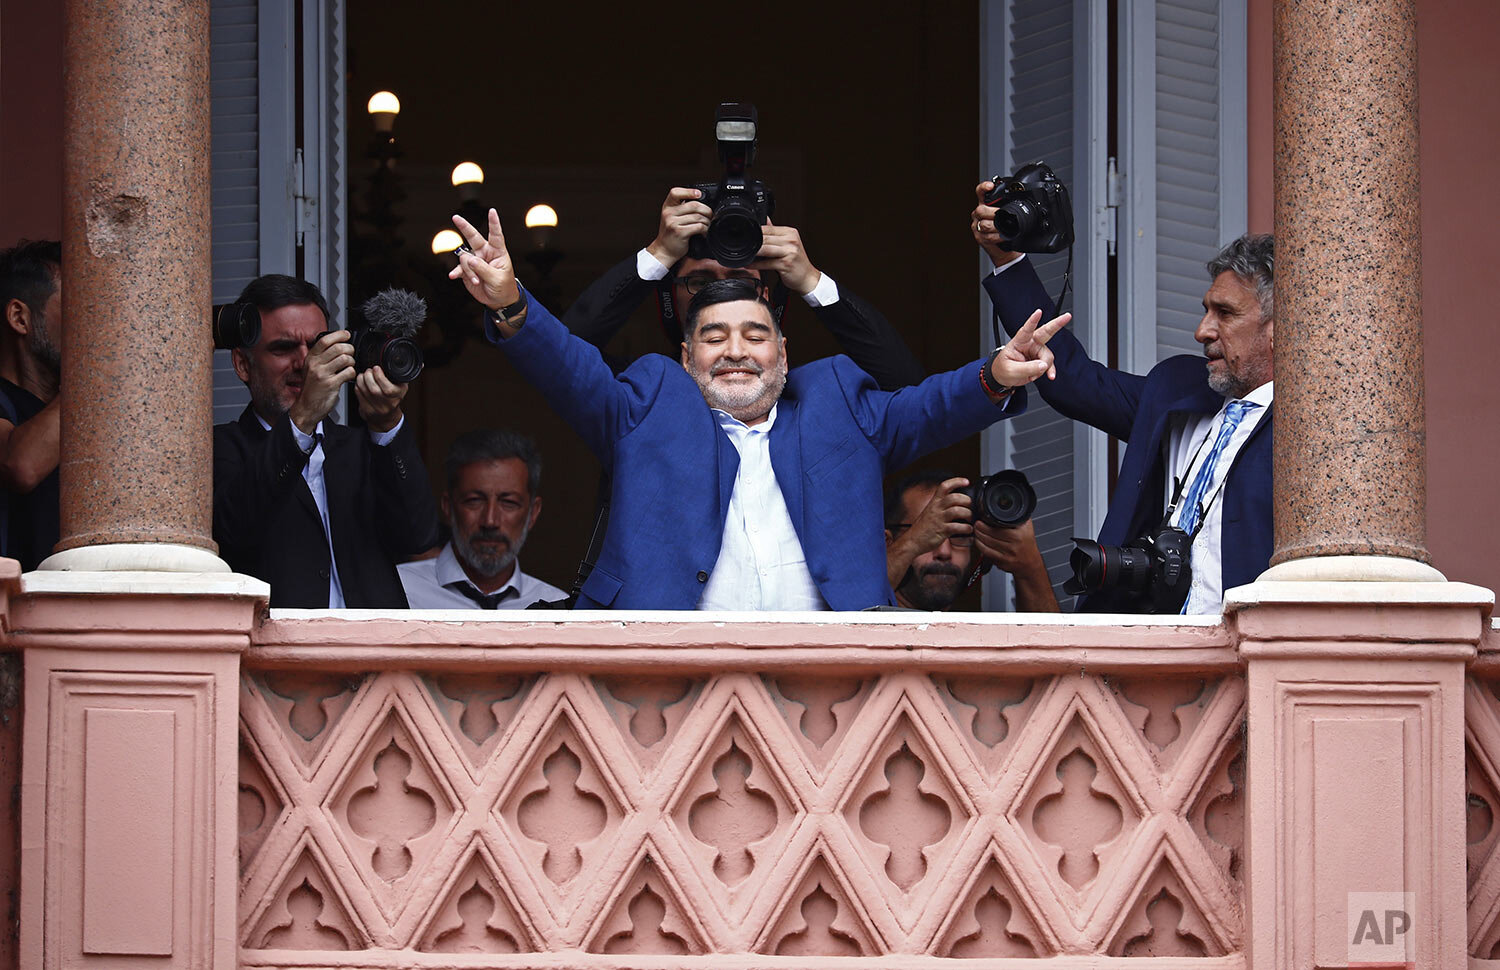  Former soccer great Diego Maradona flashes victory signs to fans below at the Casa Rosada government house after meeting with Argentine President Alberto Fernandez in Buenos Aires, Argentina, Dec. 26, 2019. Decades ago, Maradona held up his team's s